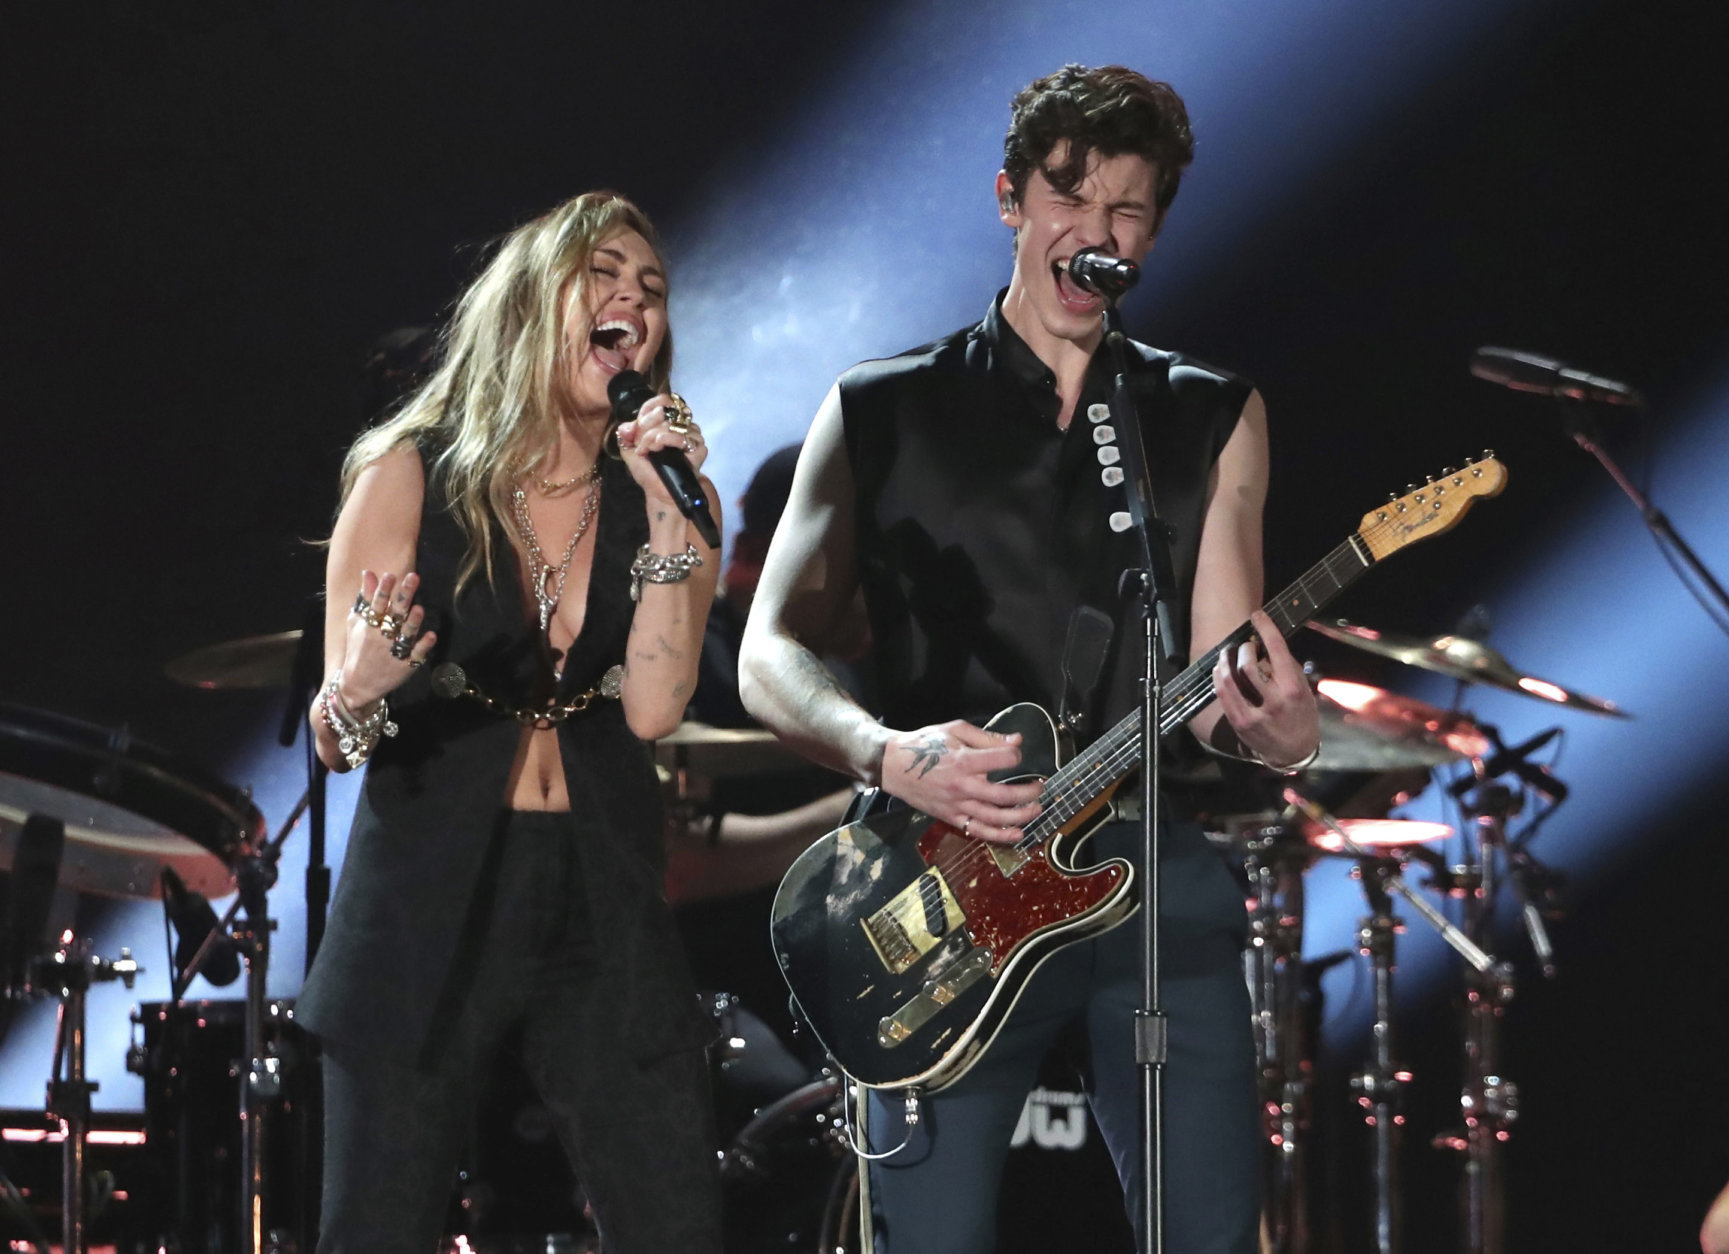 Miley Cyrus, left, and Shawn Mendes perform "In My Blood" at the 61st annual Grammy Awards on Sunday, Feb. 10, 2019, in Los Angeles. (Photo by Matt Sayles/Invision/AP)